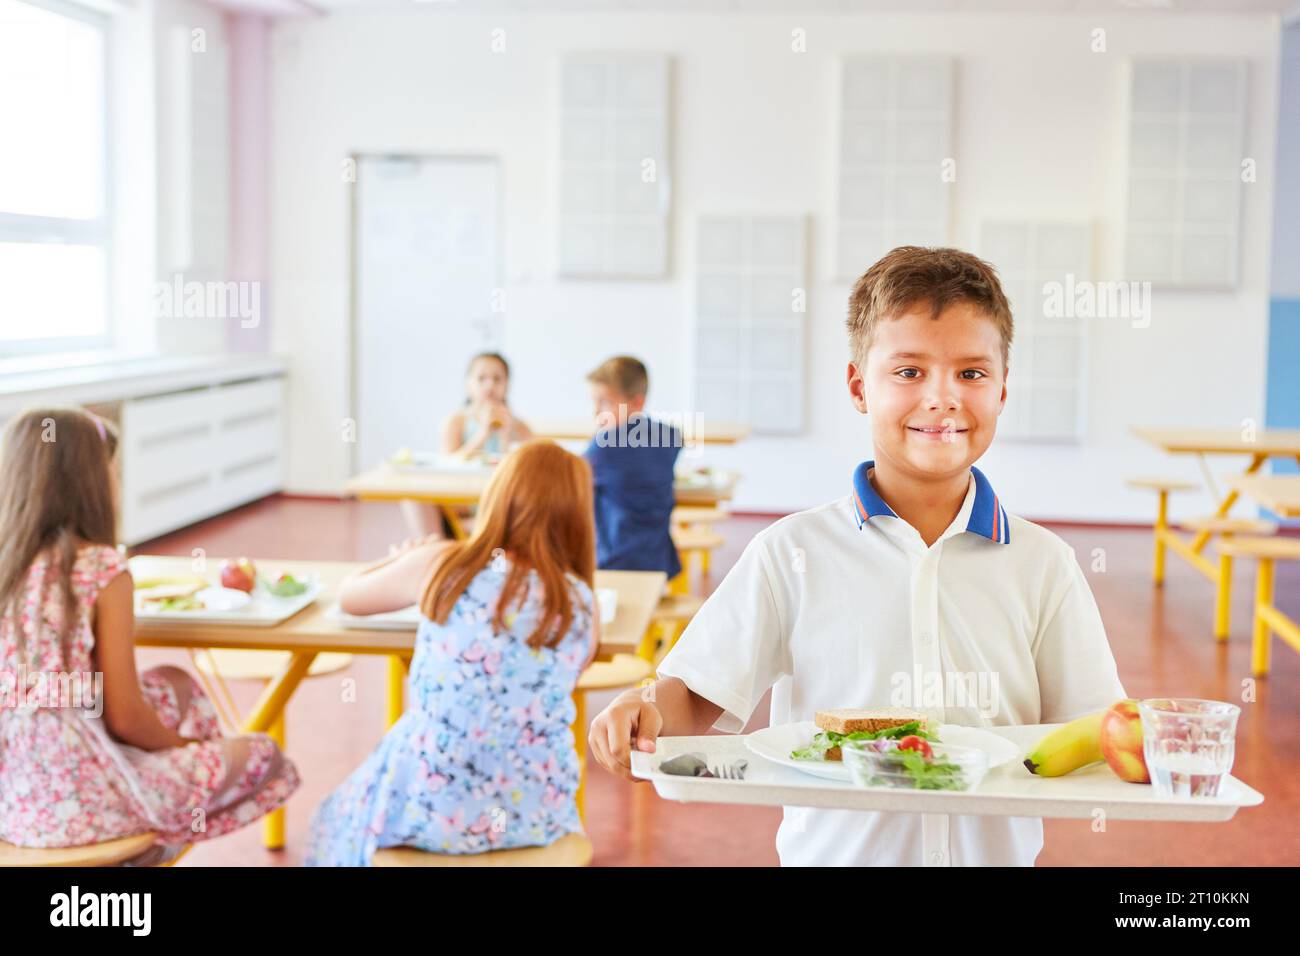 Multiracial kids sitting at table in school canteen and greeting newcomer  boy holding tray with food. Children s relationships concept. Vector  illustration for banner, website, poster, advertisement. Stock Vector